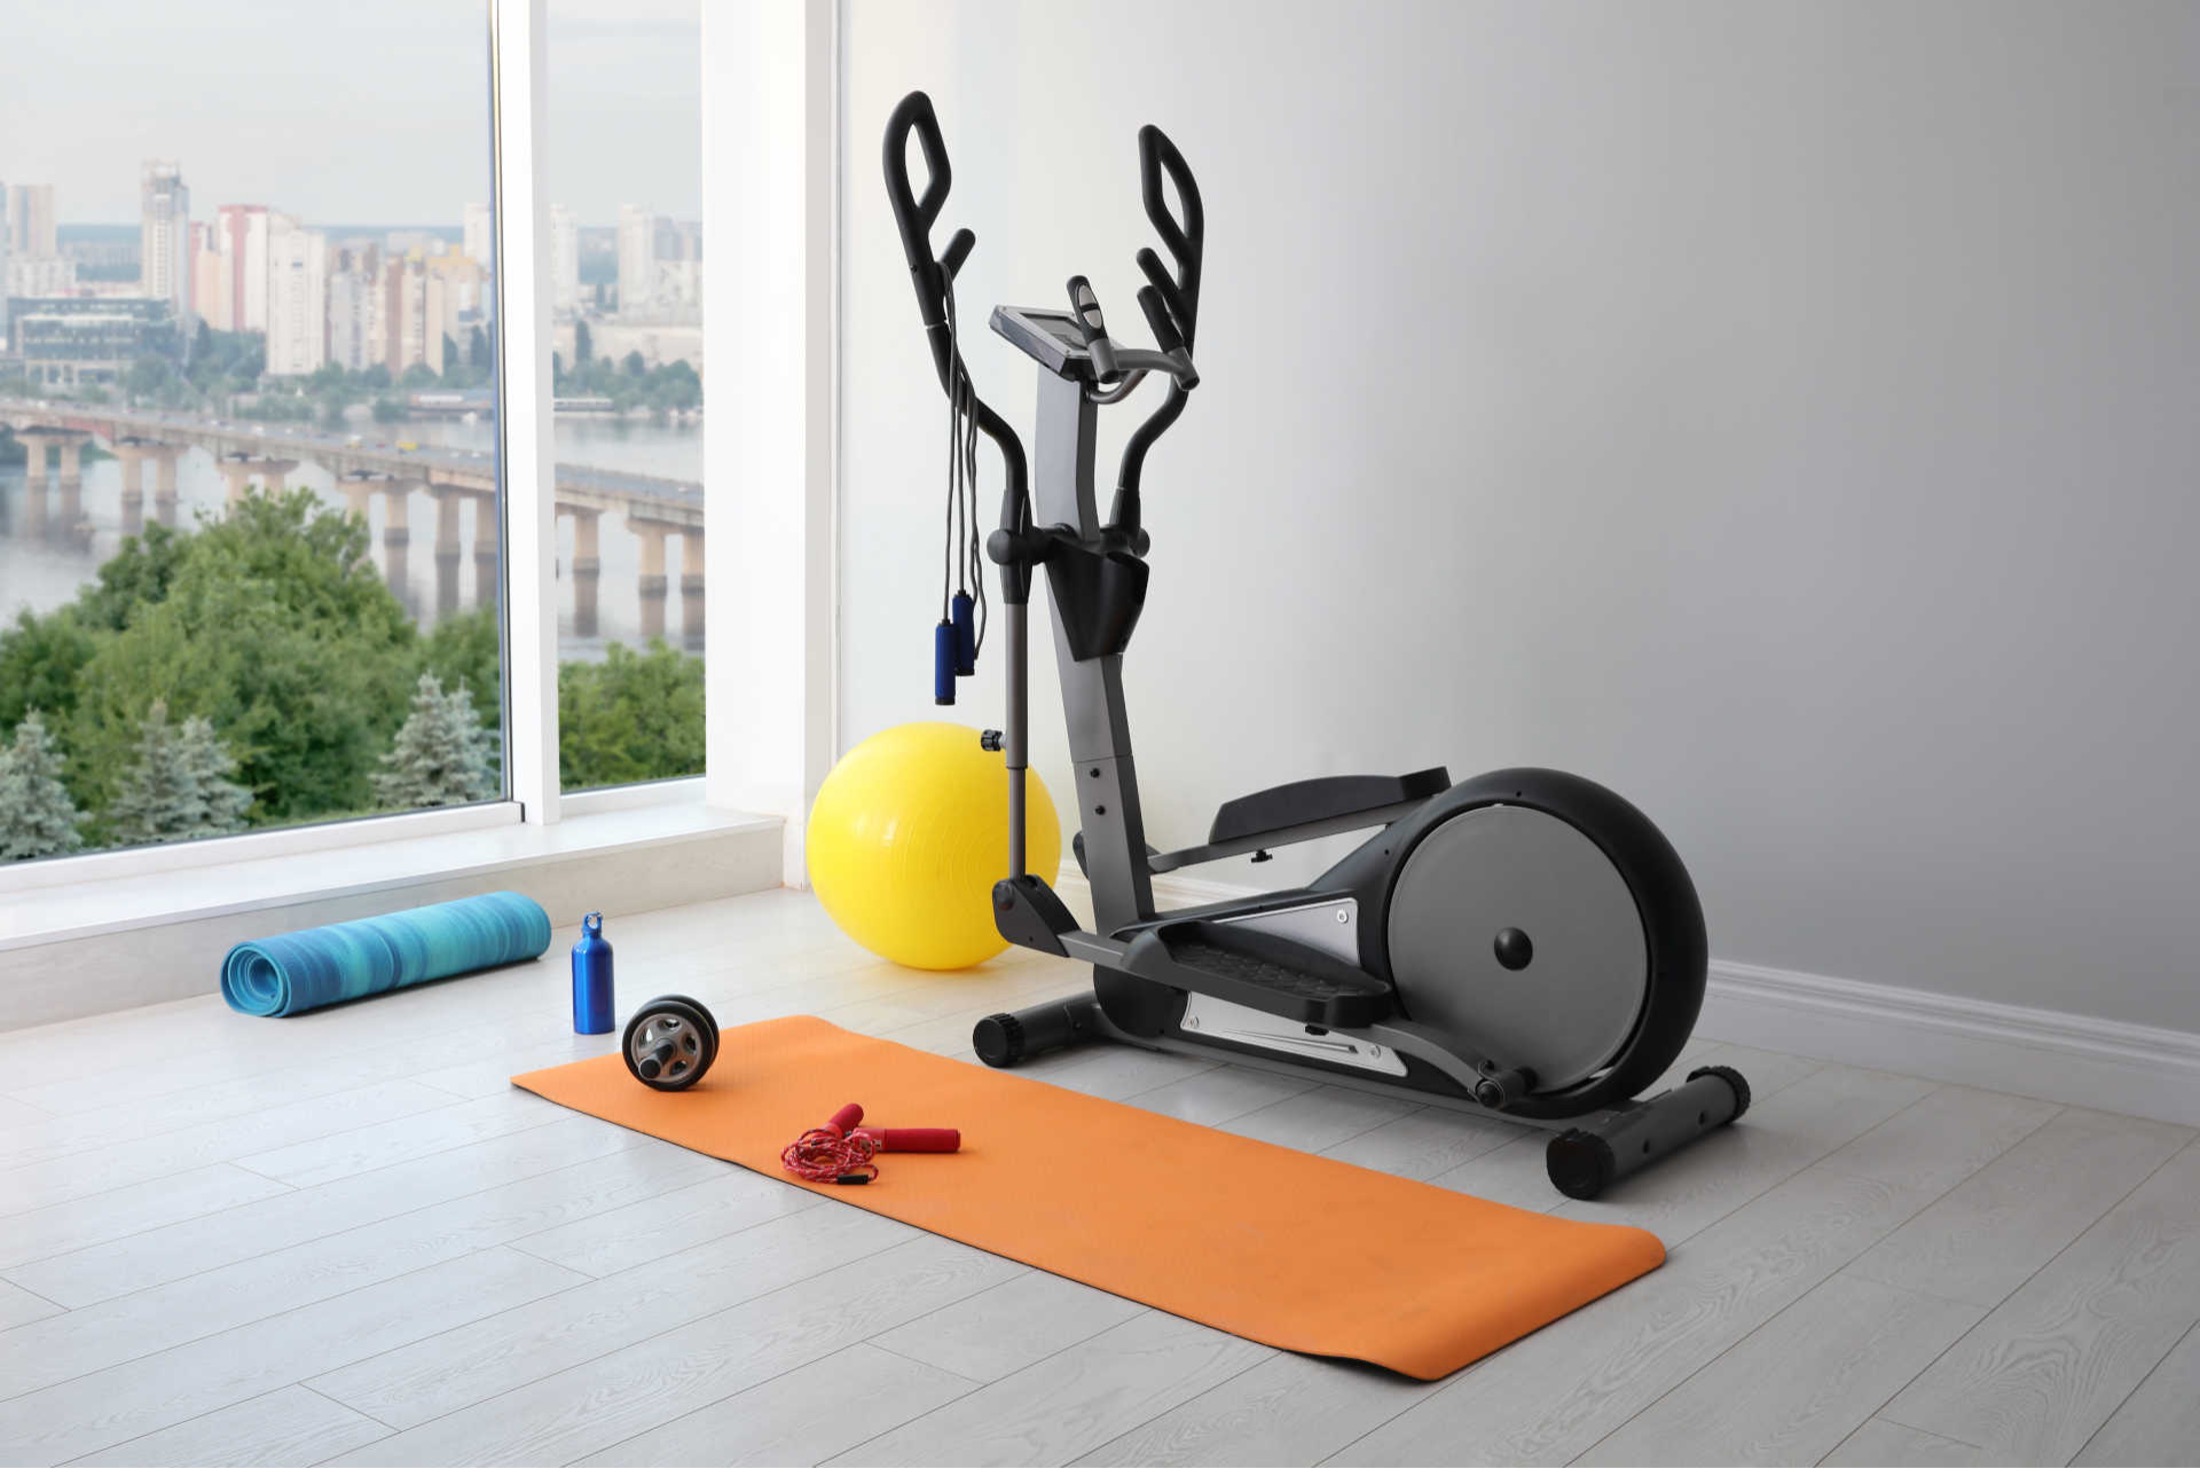 Fitness equipment for a full body workout at home